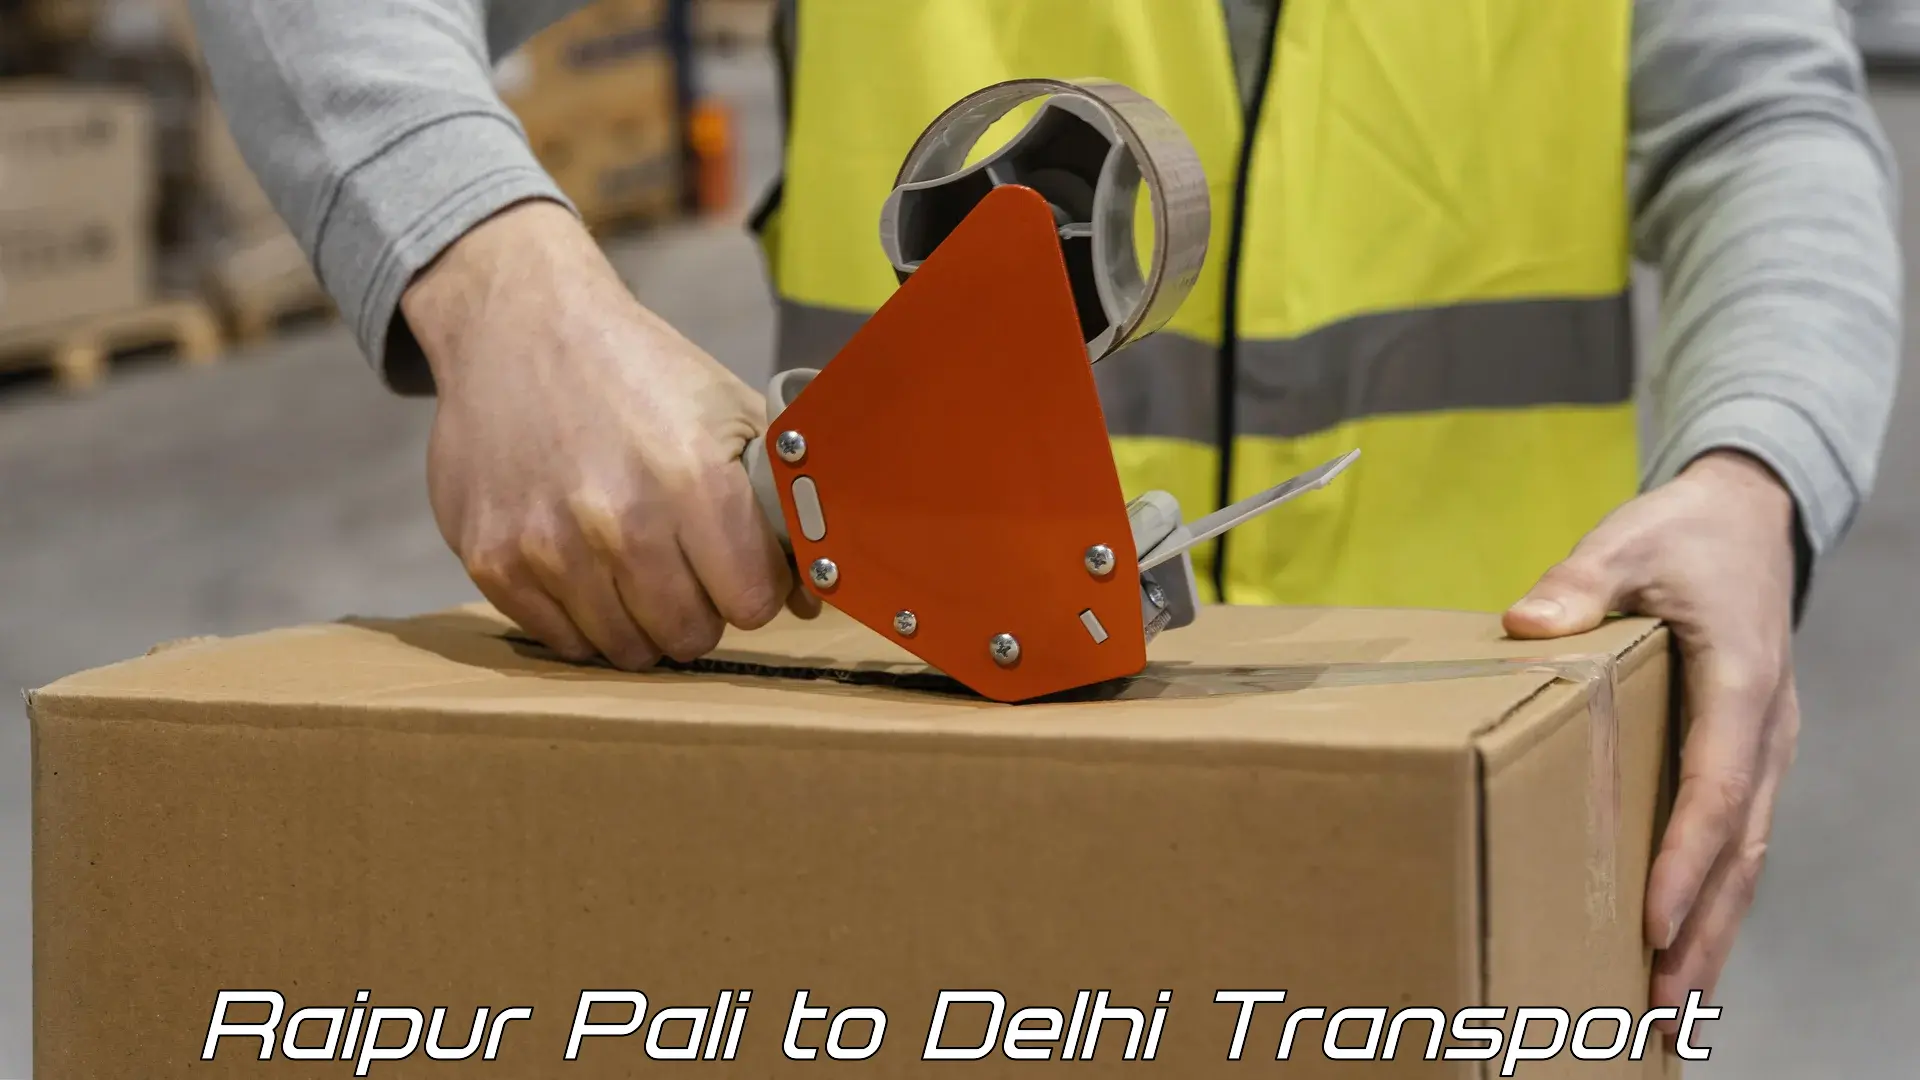 Vehicle transport services Raipur Pali to NCR